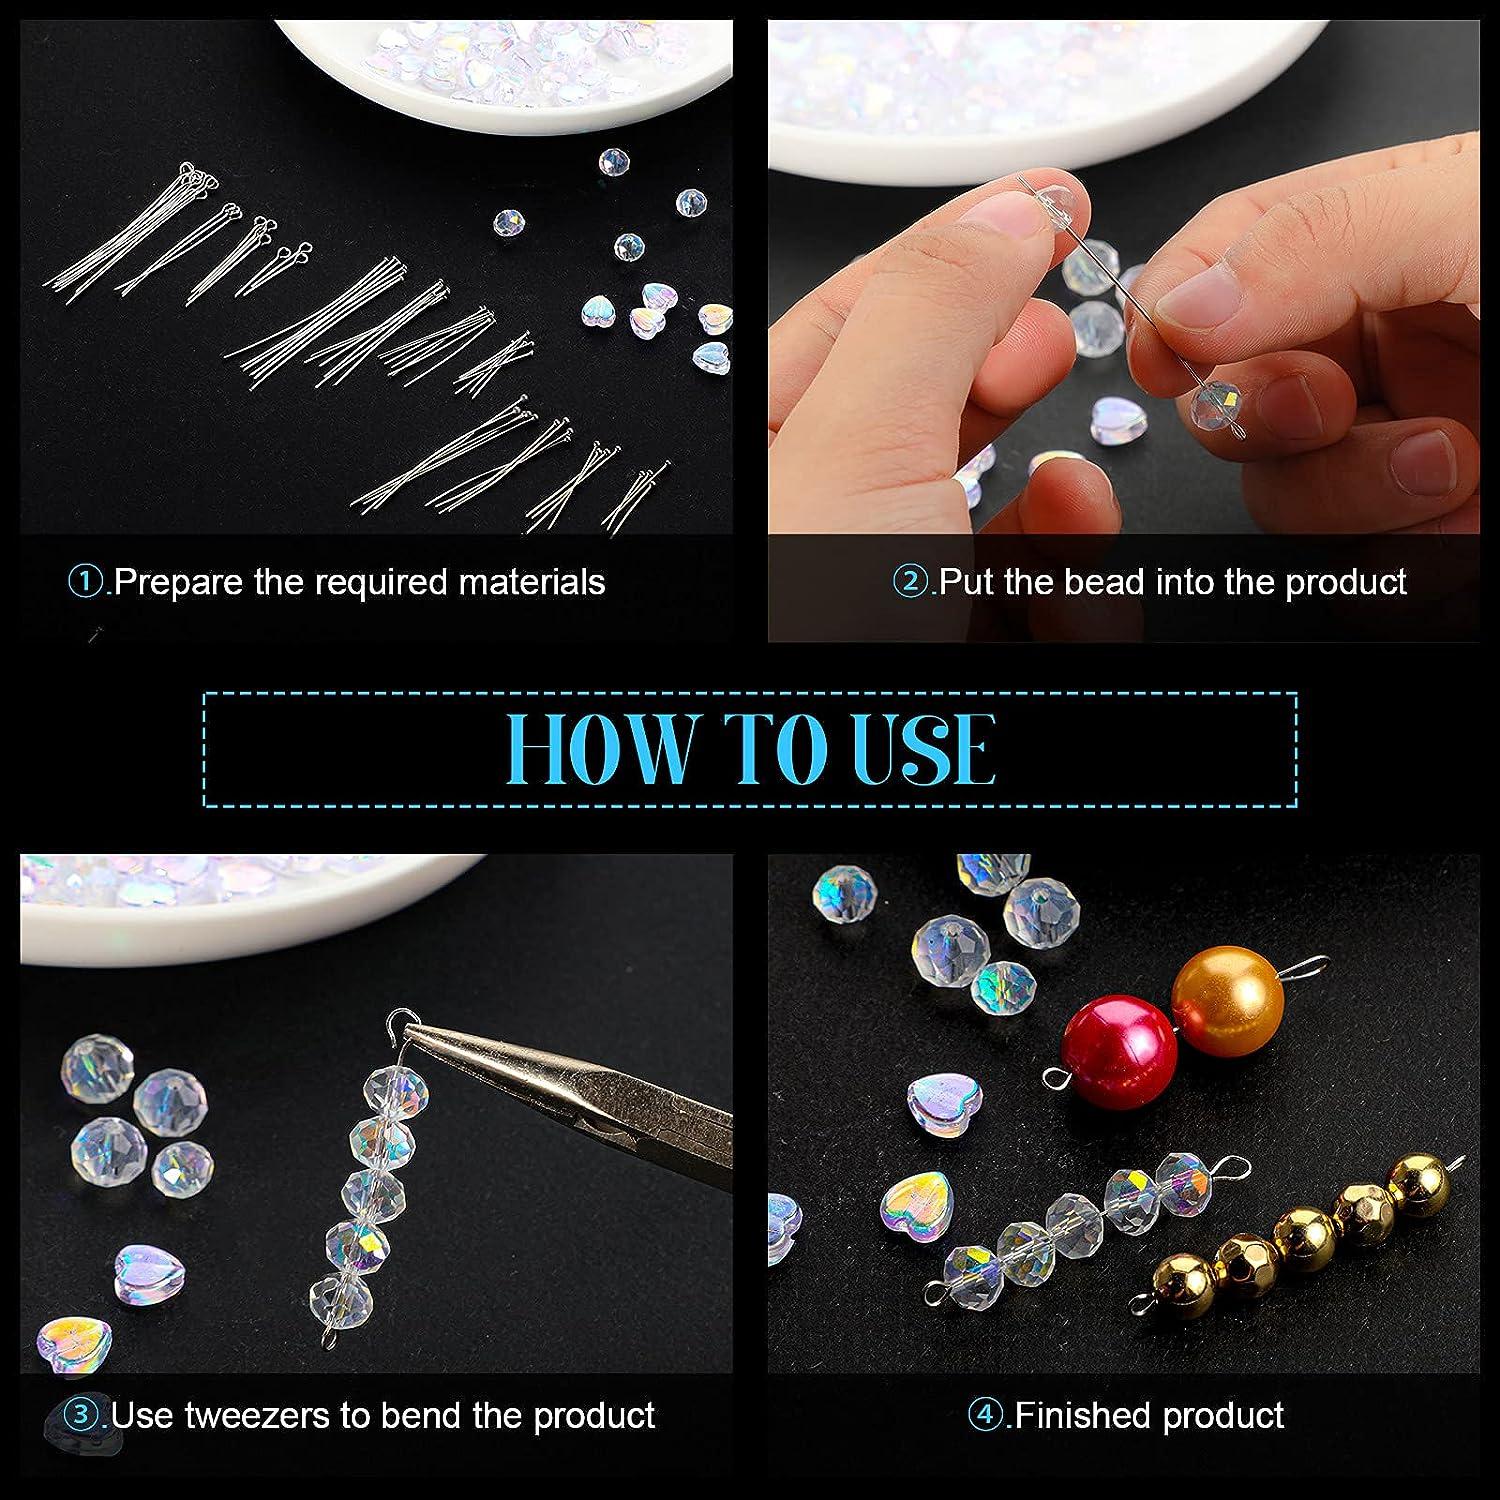 Eye Pins, Head Pins, Jewelry Making Components